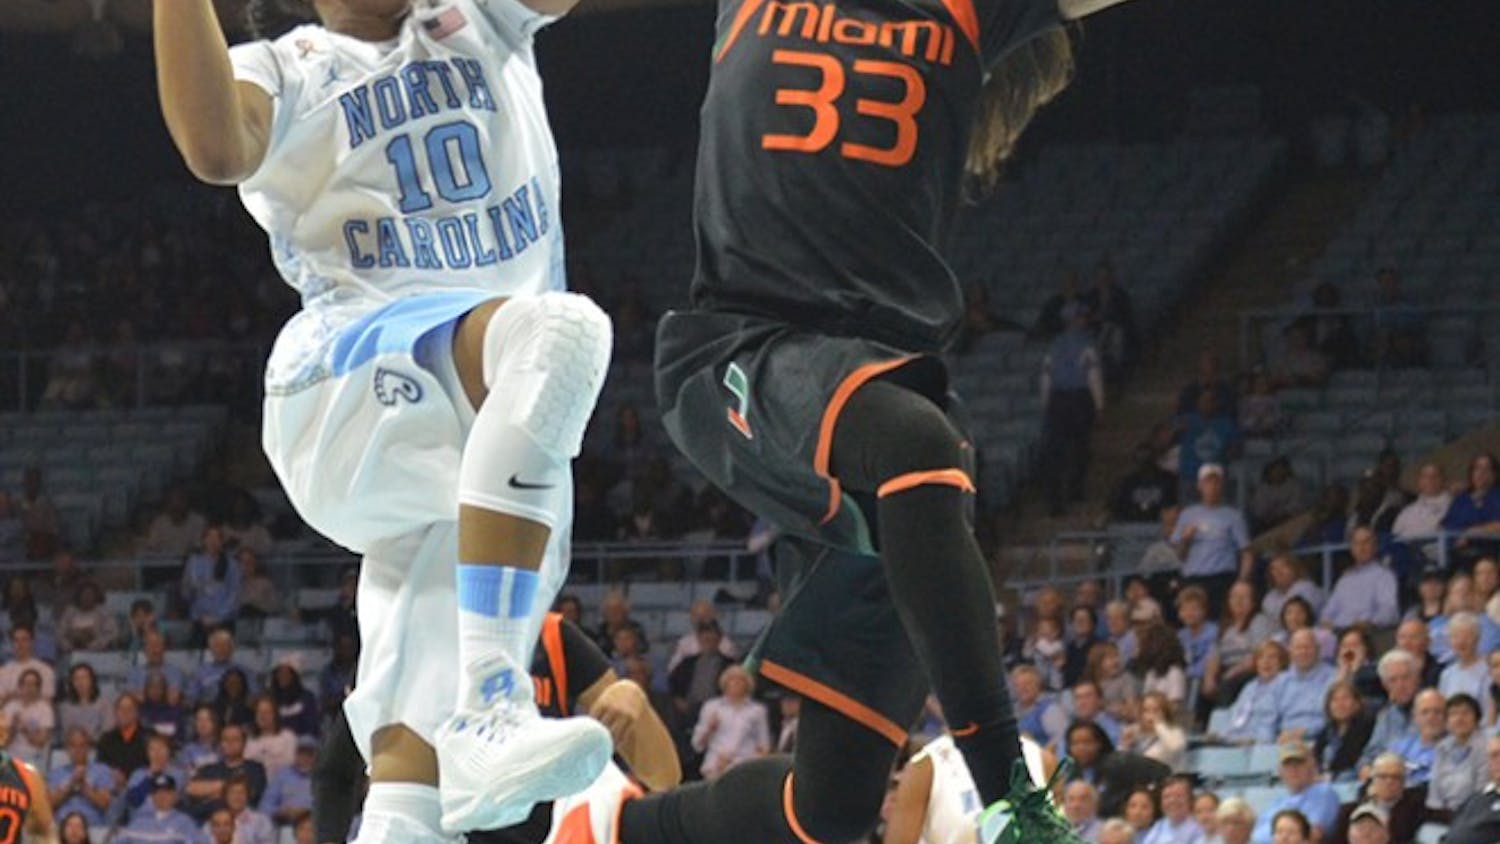 UNC guard Danielle Butts (10) makes a shot and draws a foul from Miami guard Suriya McGuire (33).